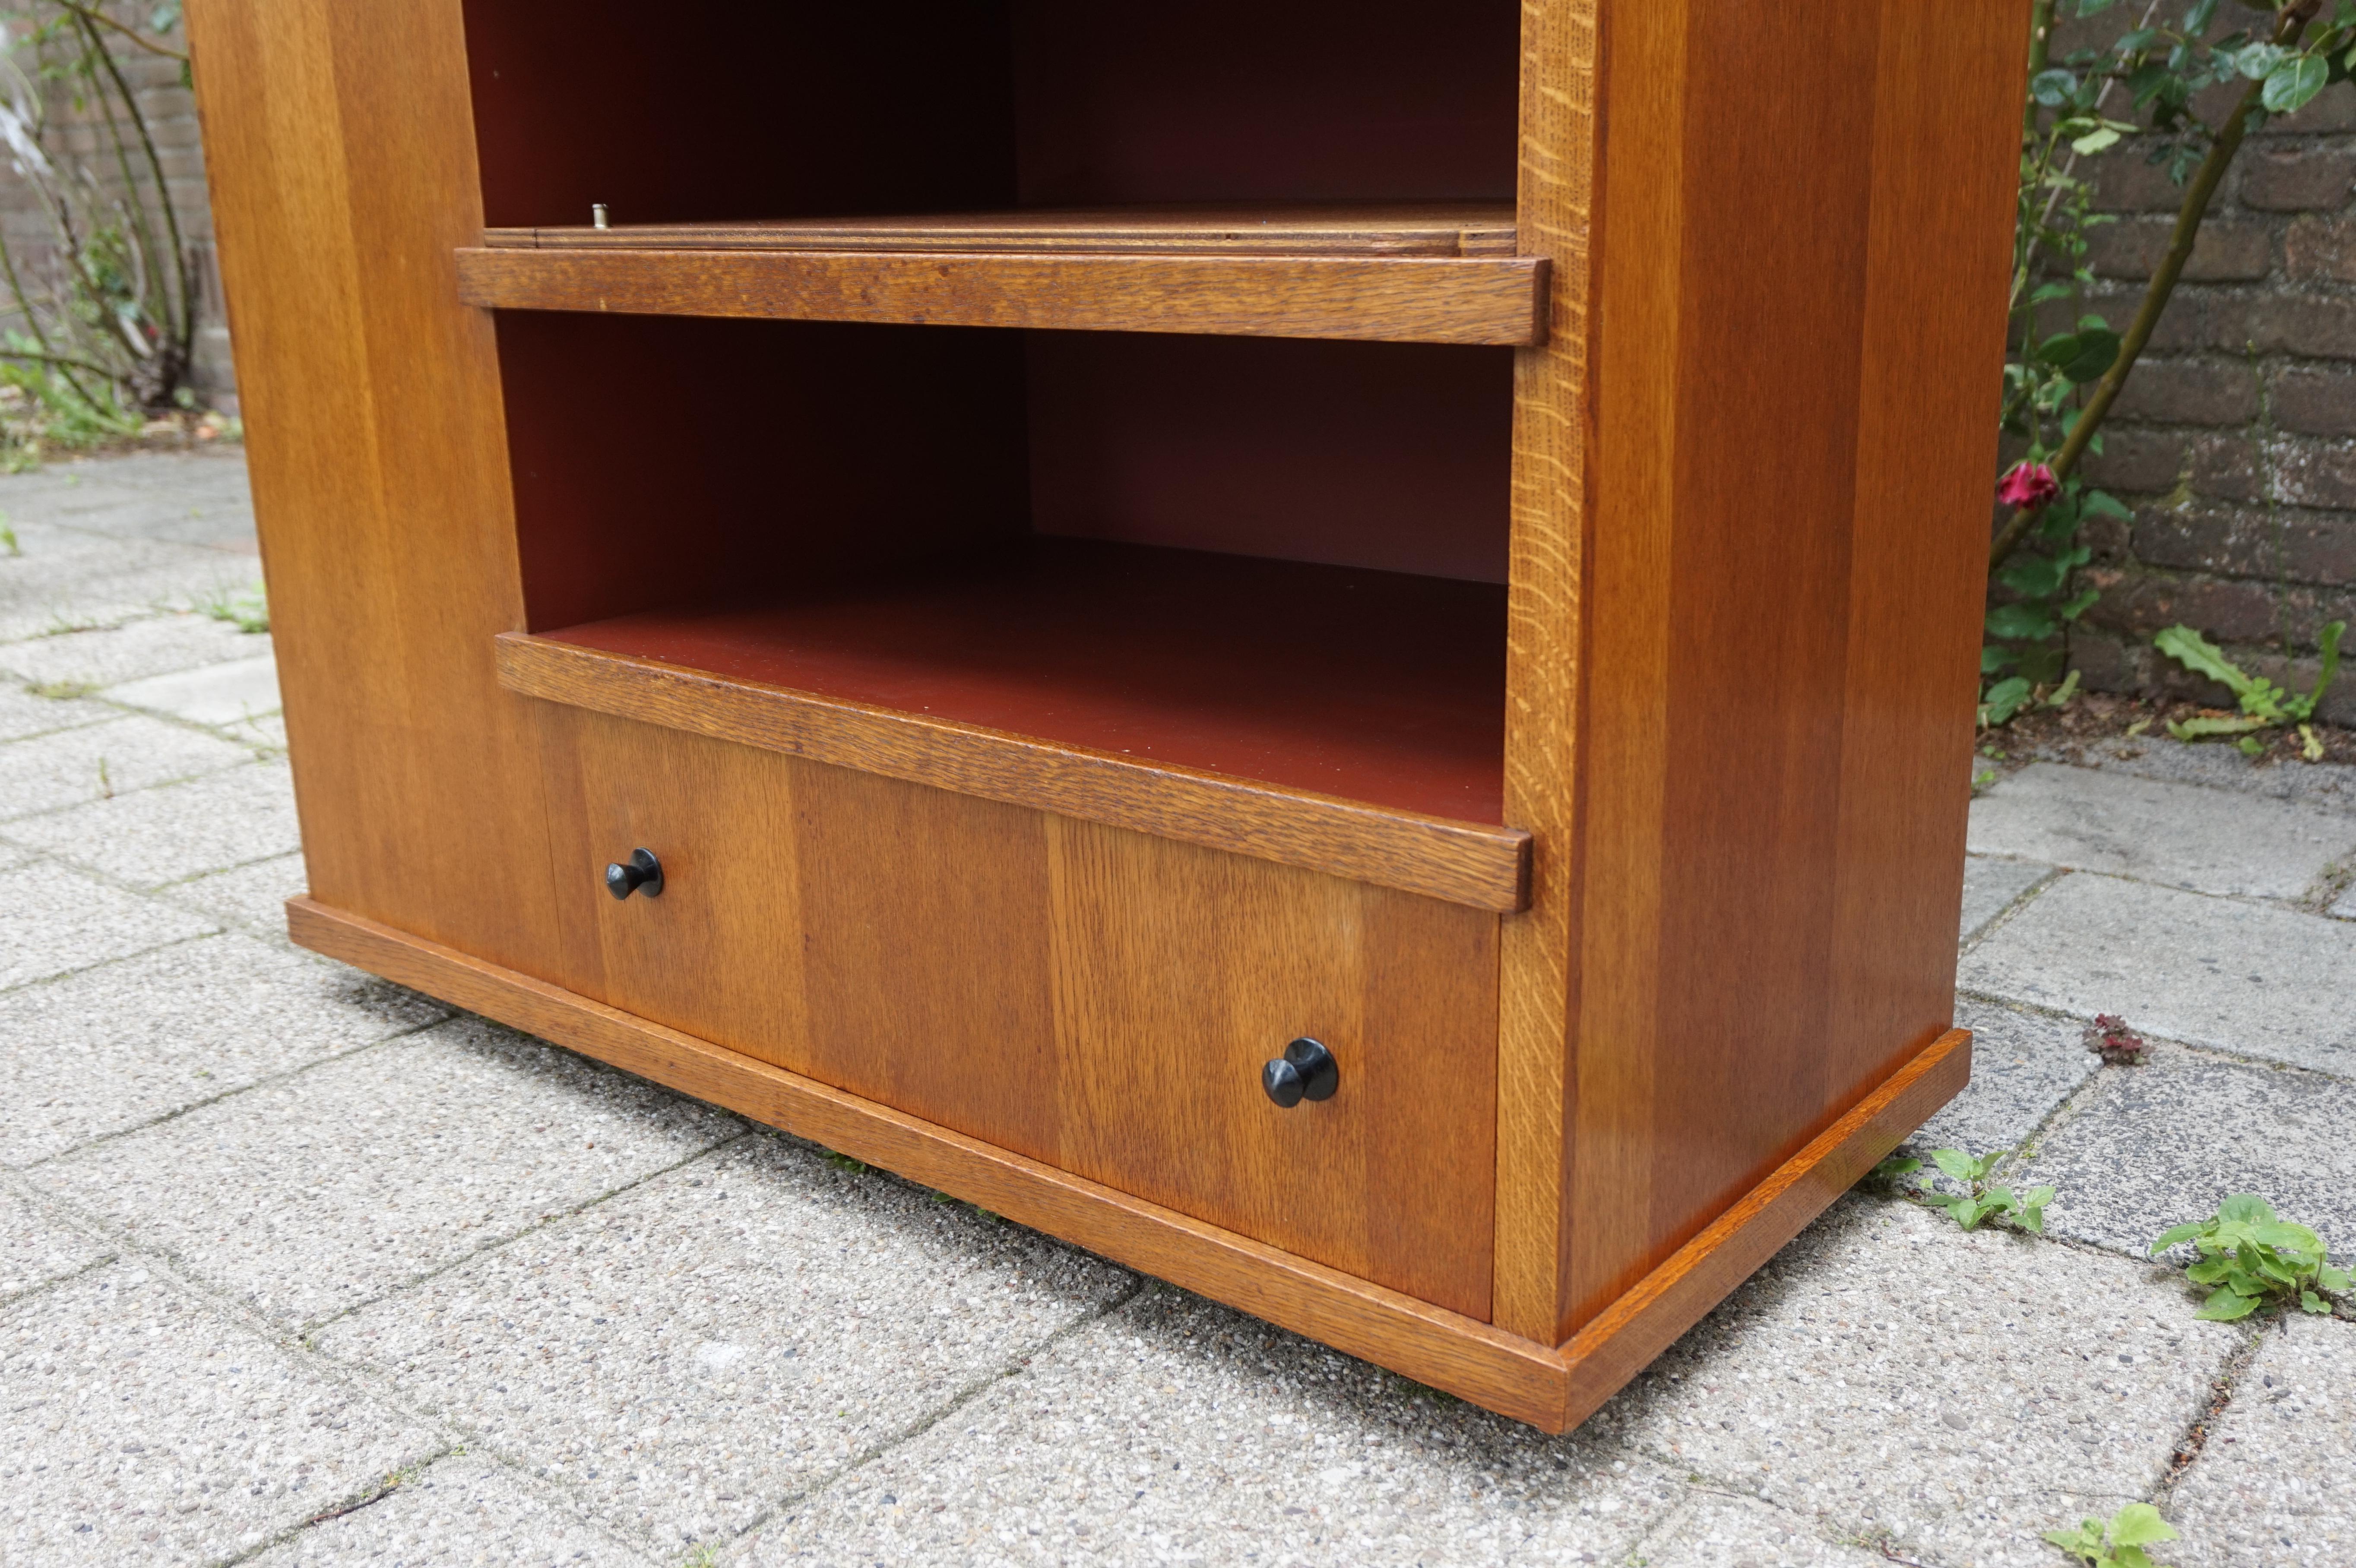 20th Century Art Deco The Hague School Style Drinks Cabinet / Sideboard / Small Credenza 1920